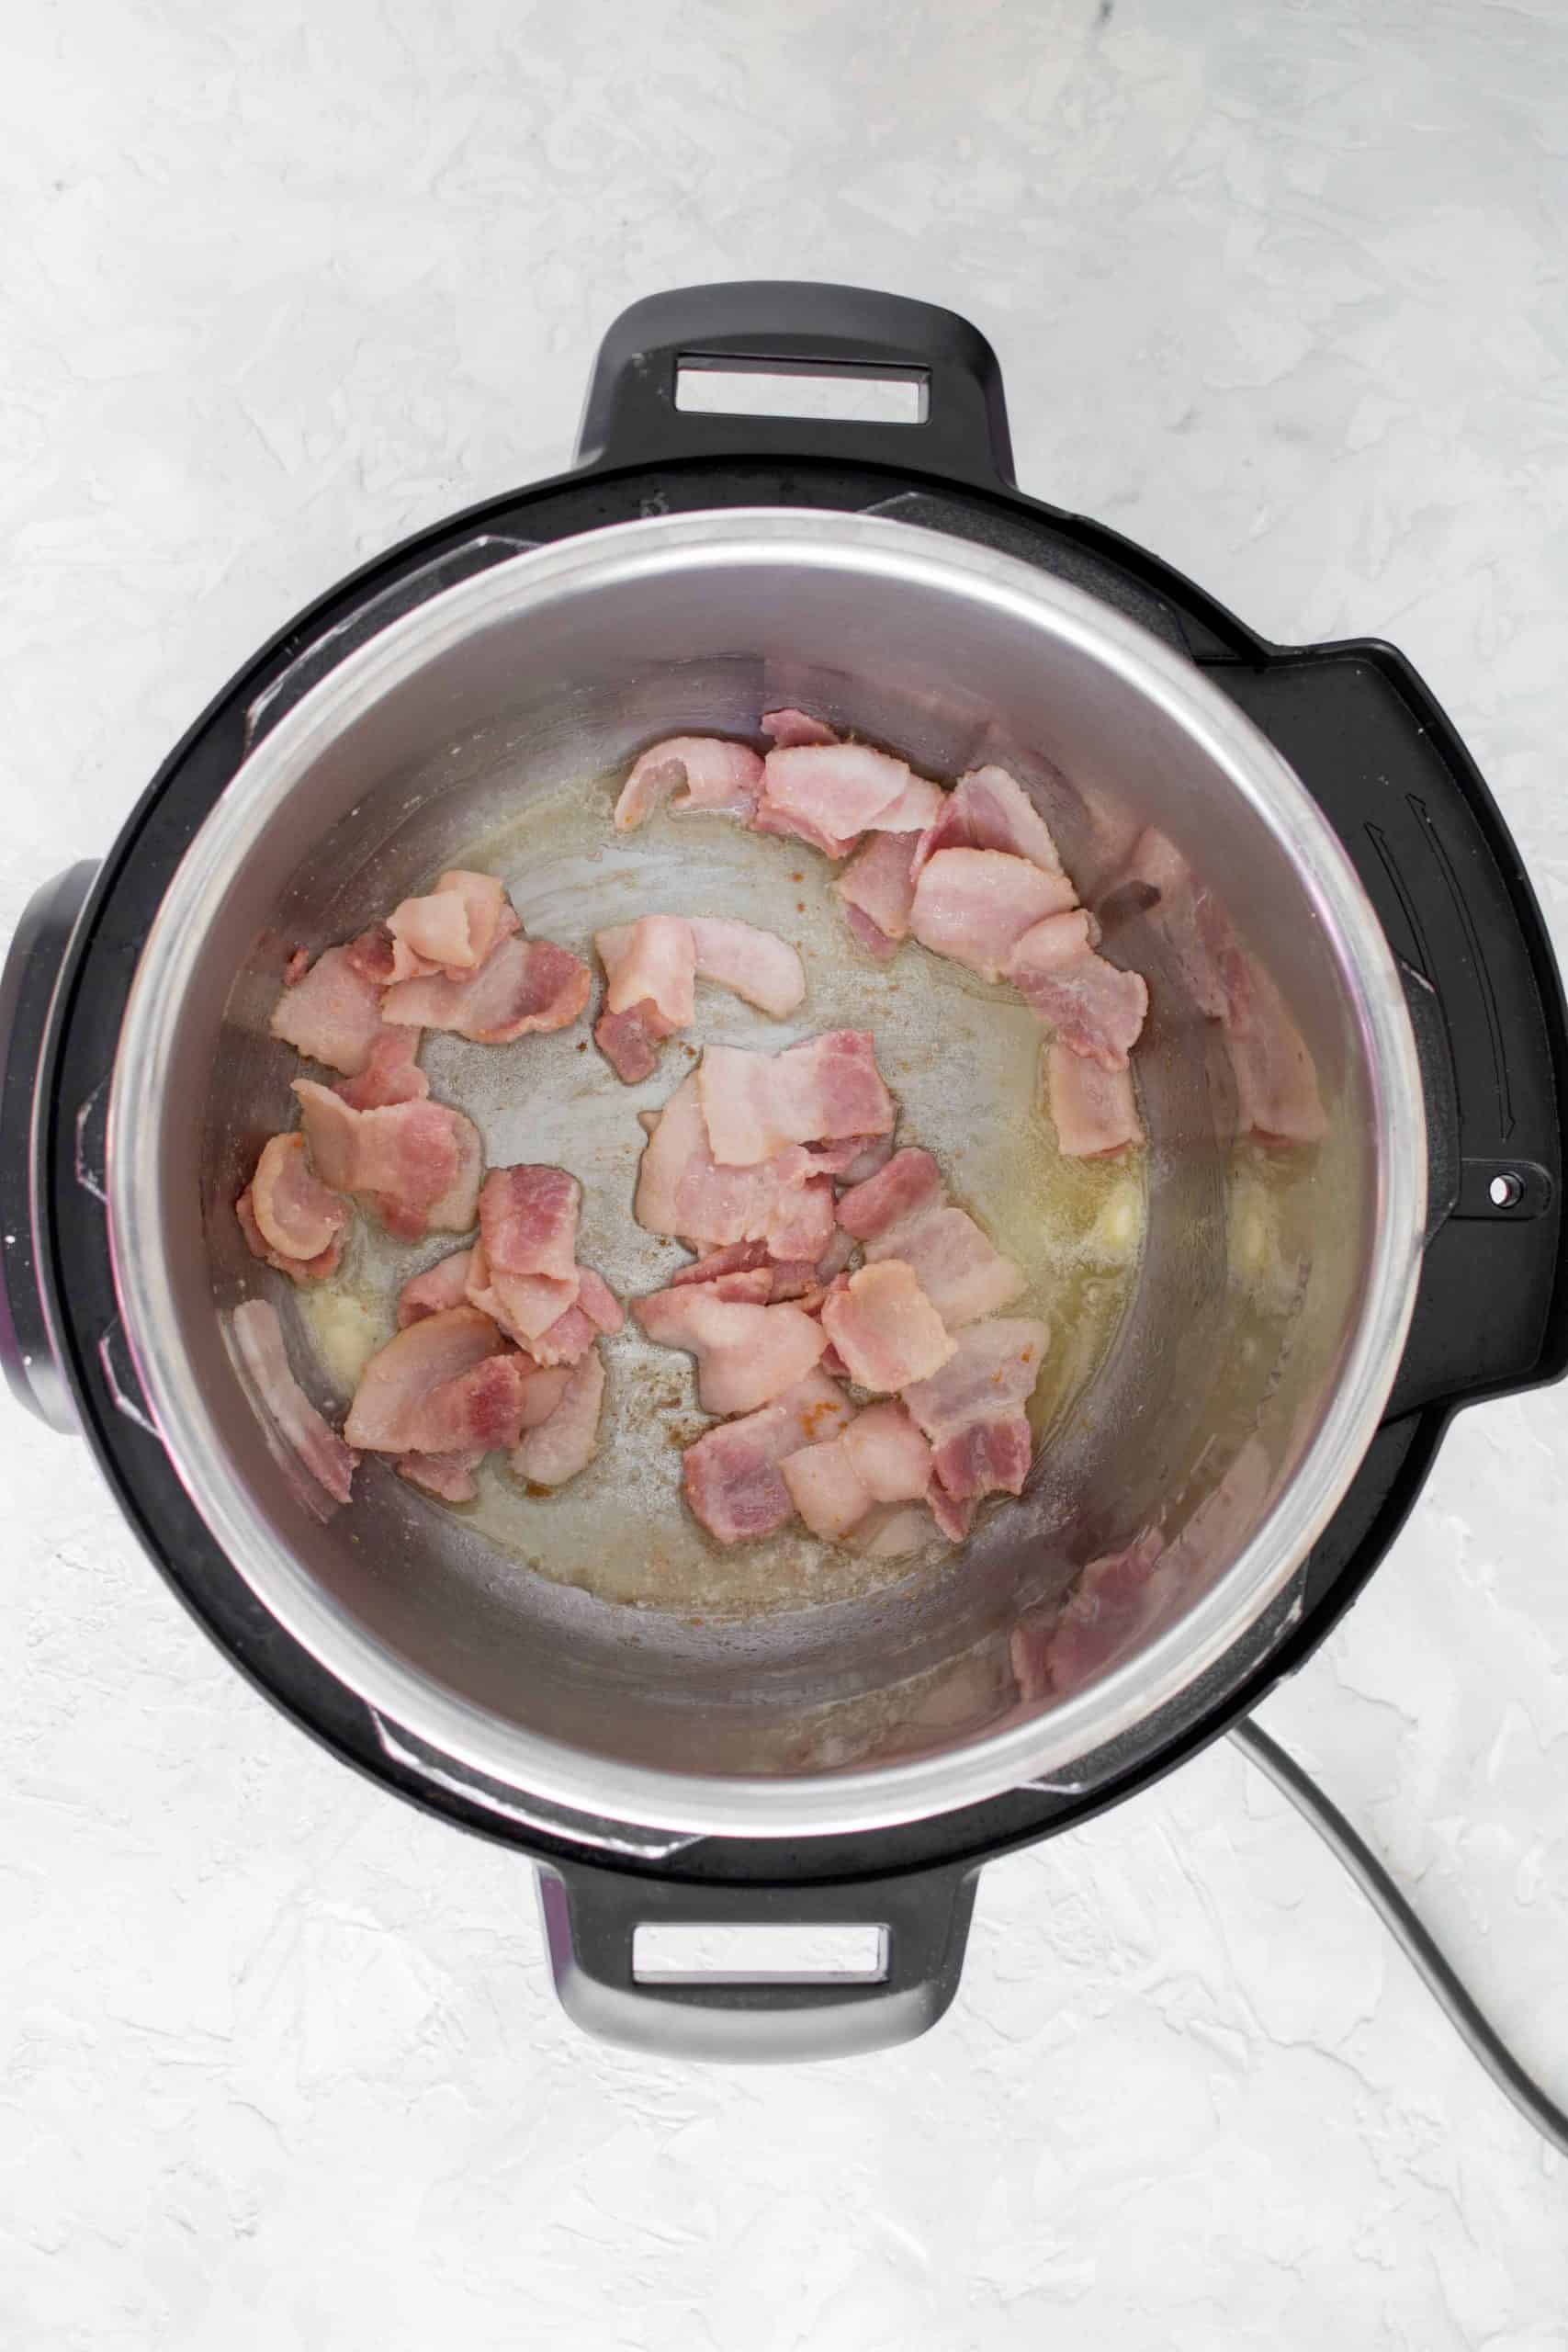 On sauté mode, add in your cut up bacon. Cook it for 2-3 minutes.